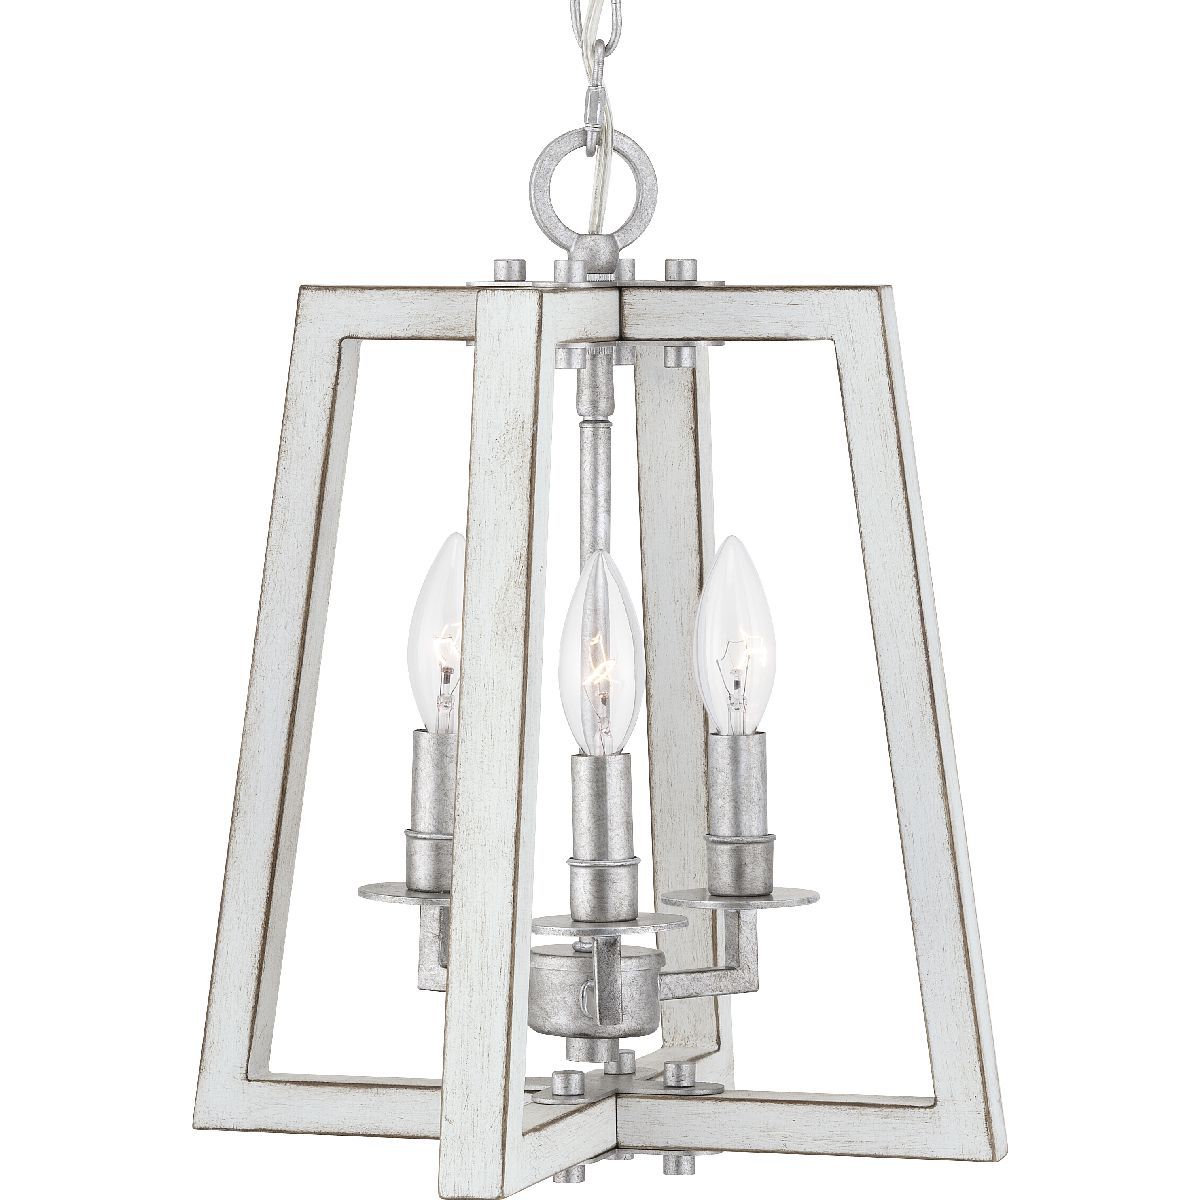 2020 Black With White Lantern Chandeliers Within Progress Lighting Forrester 3 Light Antique White And Galvanized Farmhouse Lantern  Pendant Light In The Pendant Lighting Department At Lowes (View 12 of 15)